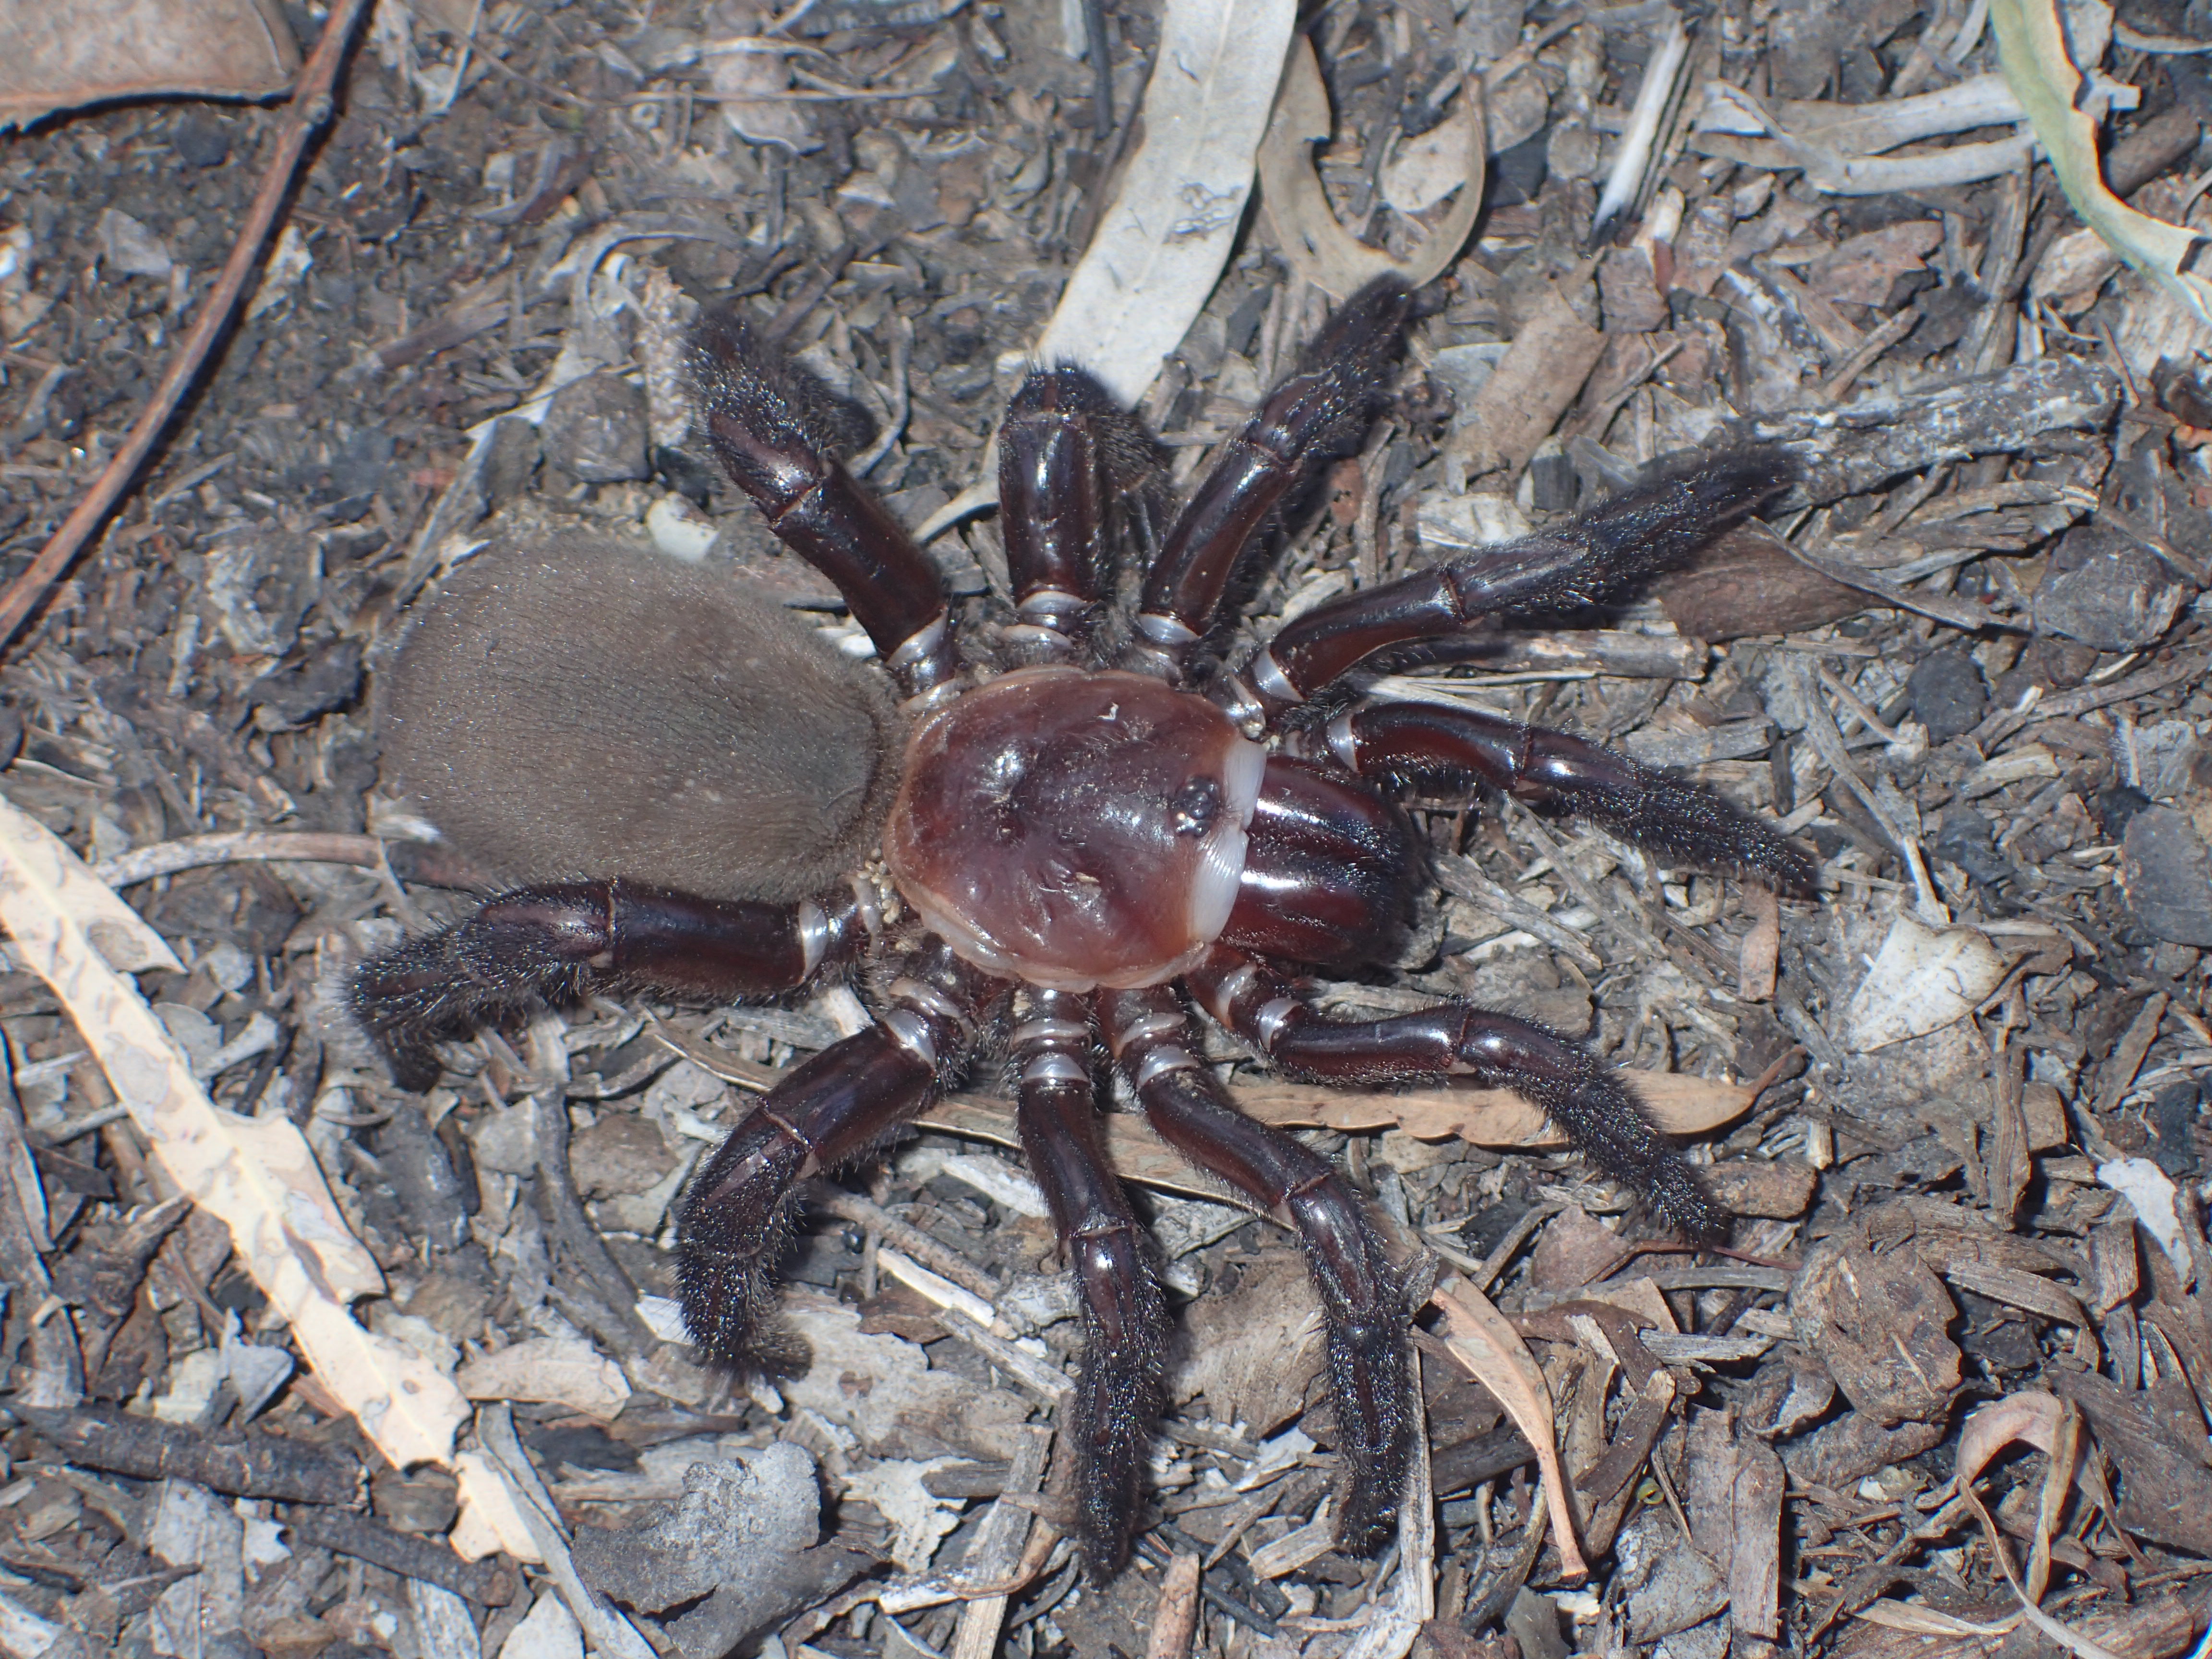 Rare and giant' trapdoor spider species, Euoplos dignitas, discovered in  Brigalow Belt - ABC News